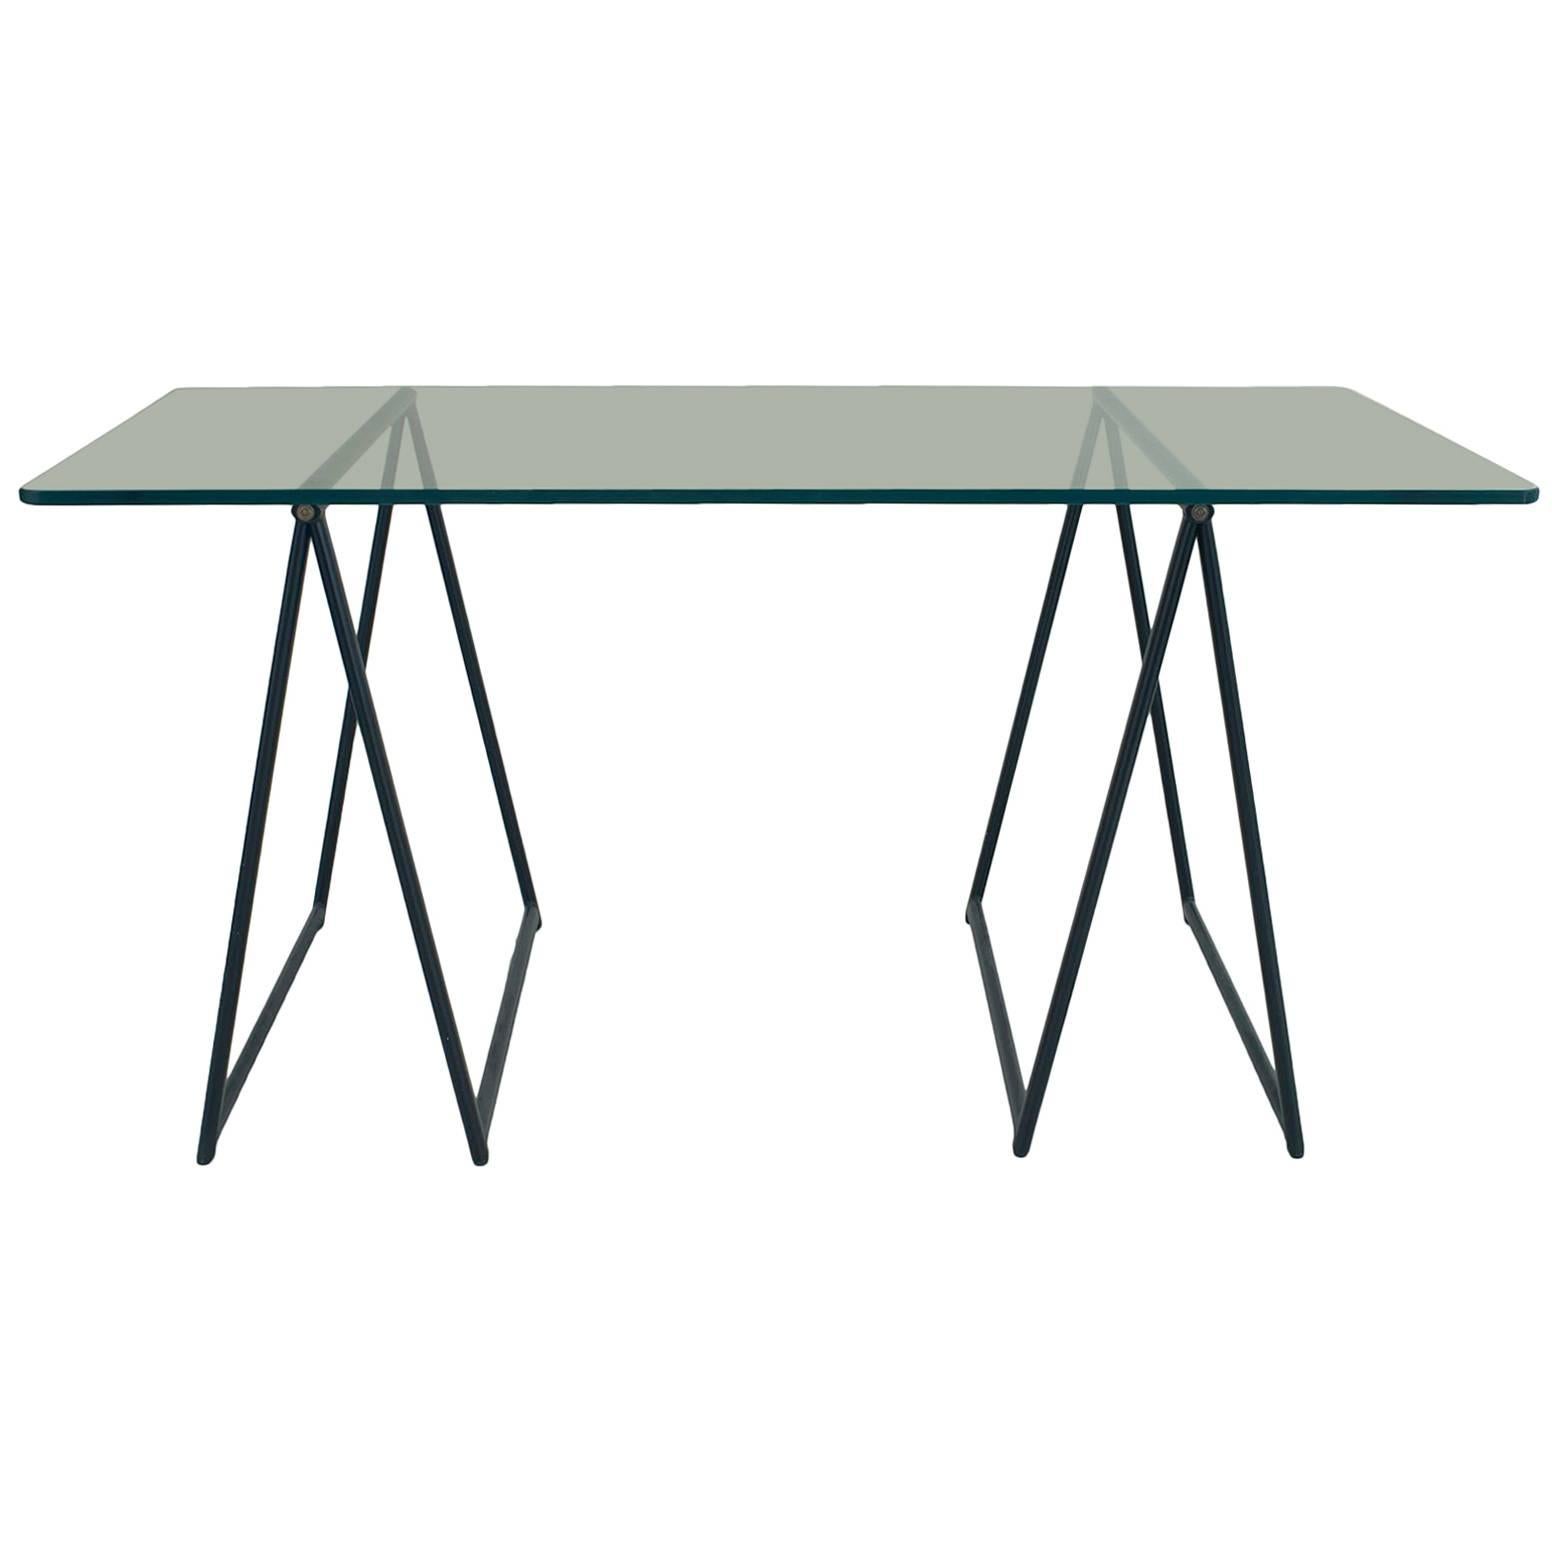 Post-War Campaign Style Jansen Post-War Glass Table For Sale